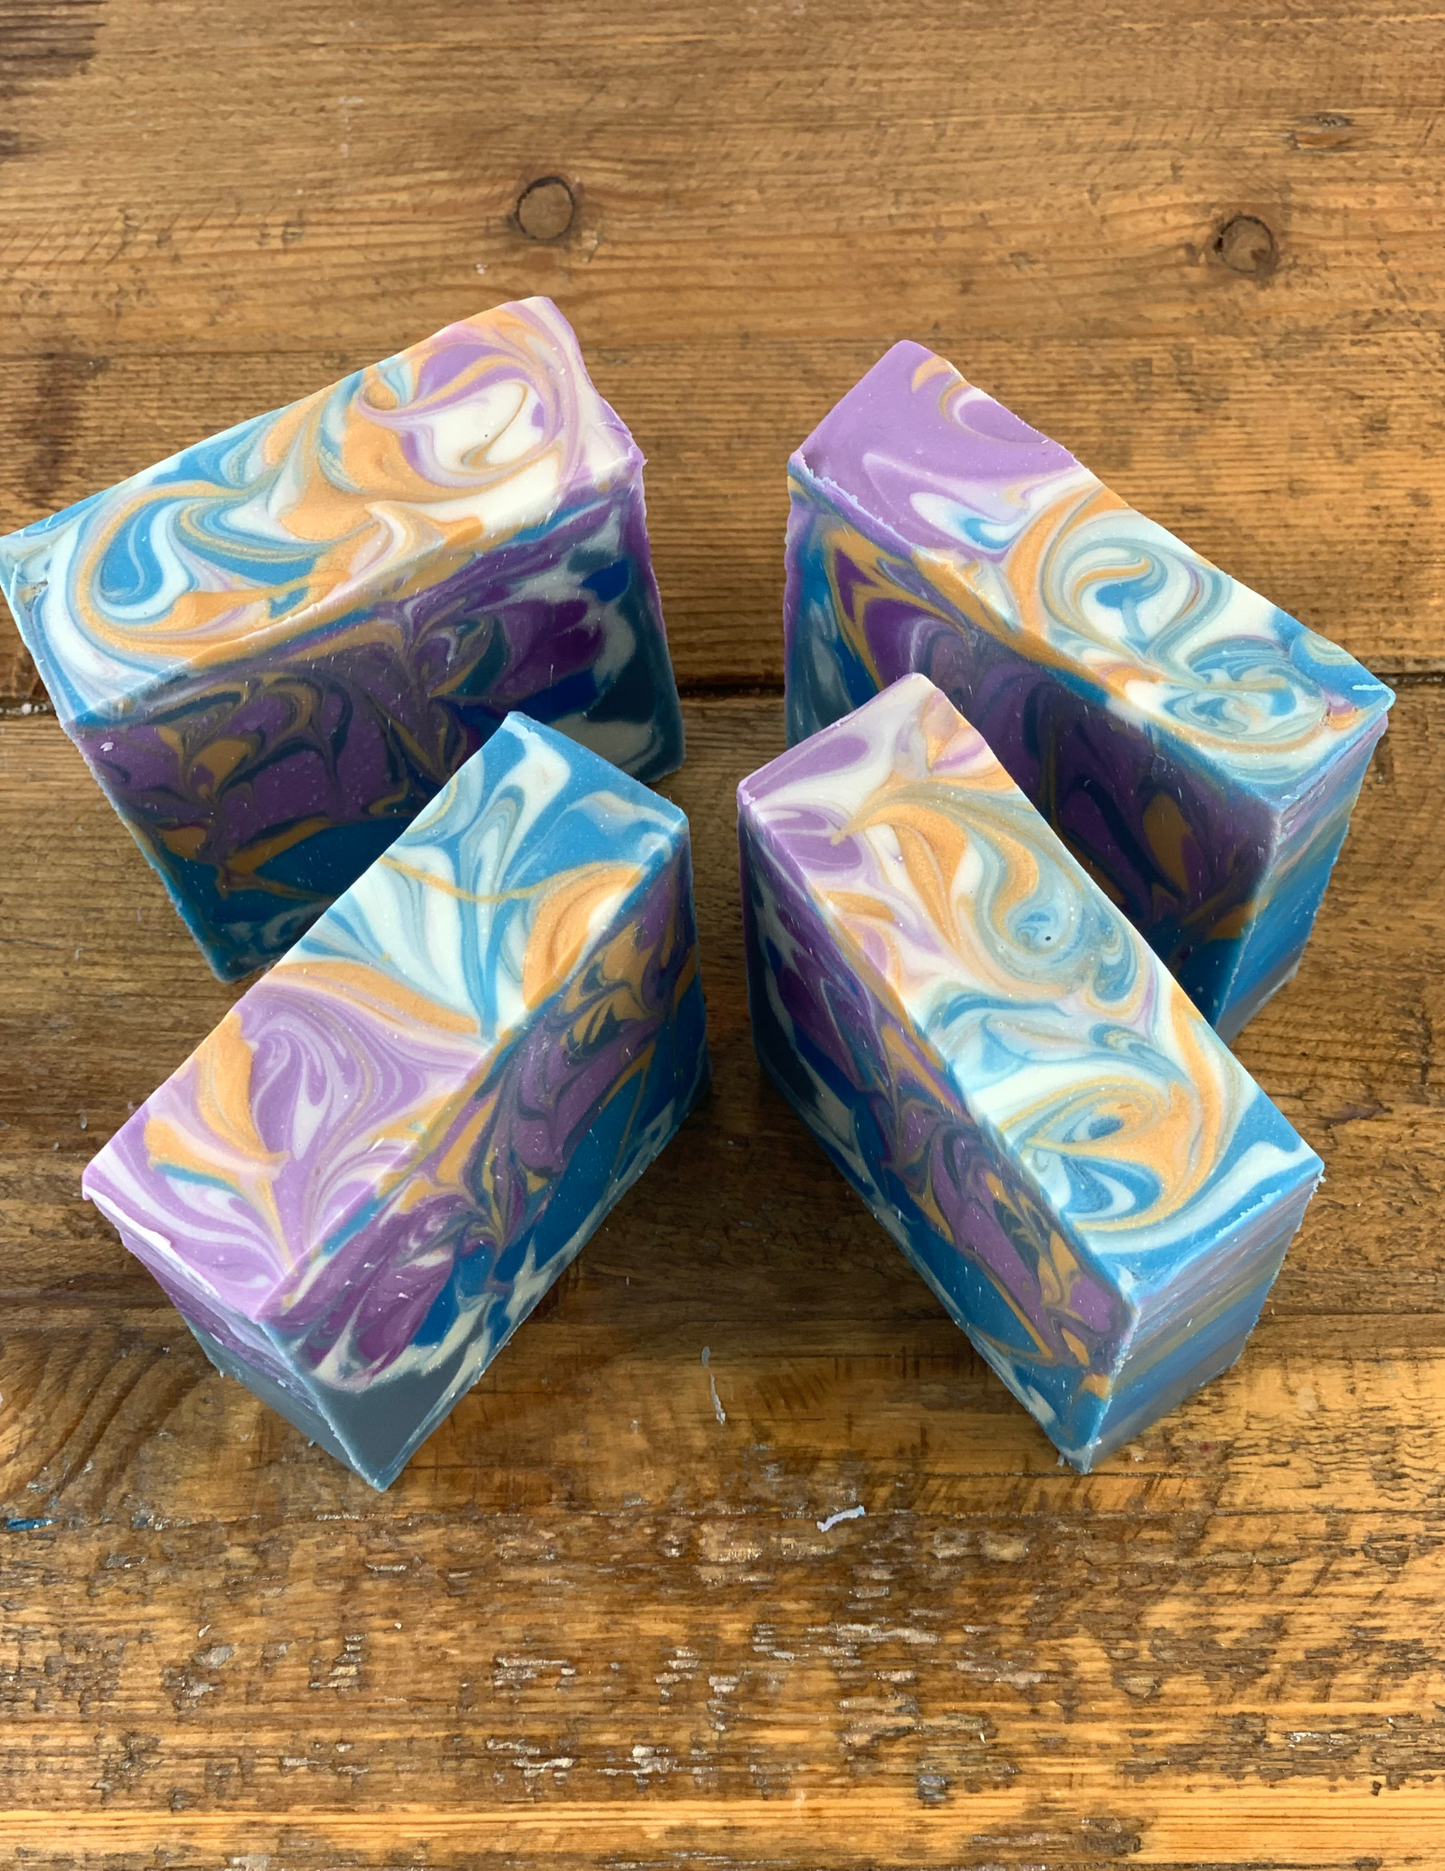 Four bars showing their swirled tops in purple, blue, gold and white swirls. Bars are sitting on a wooden table. 